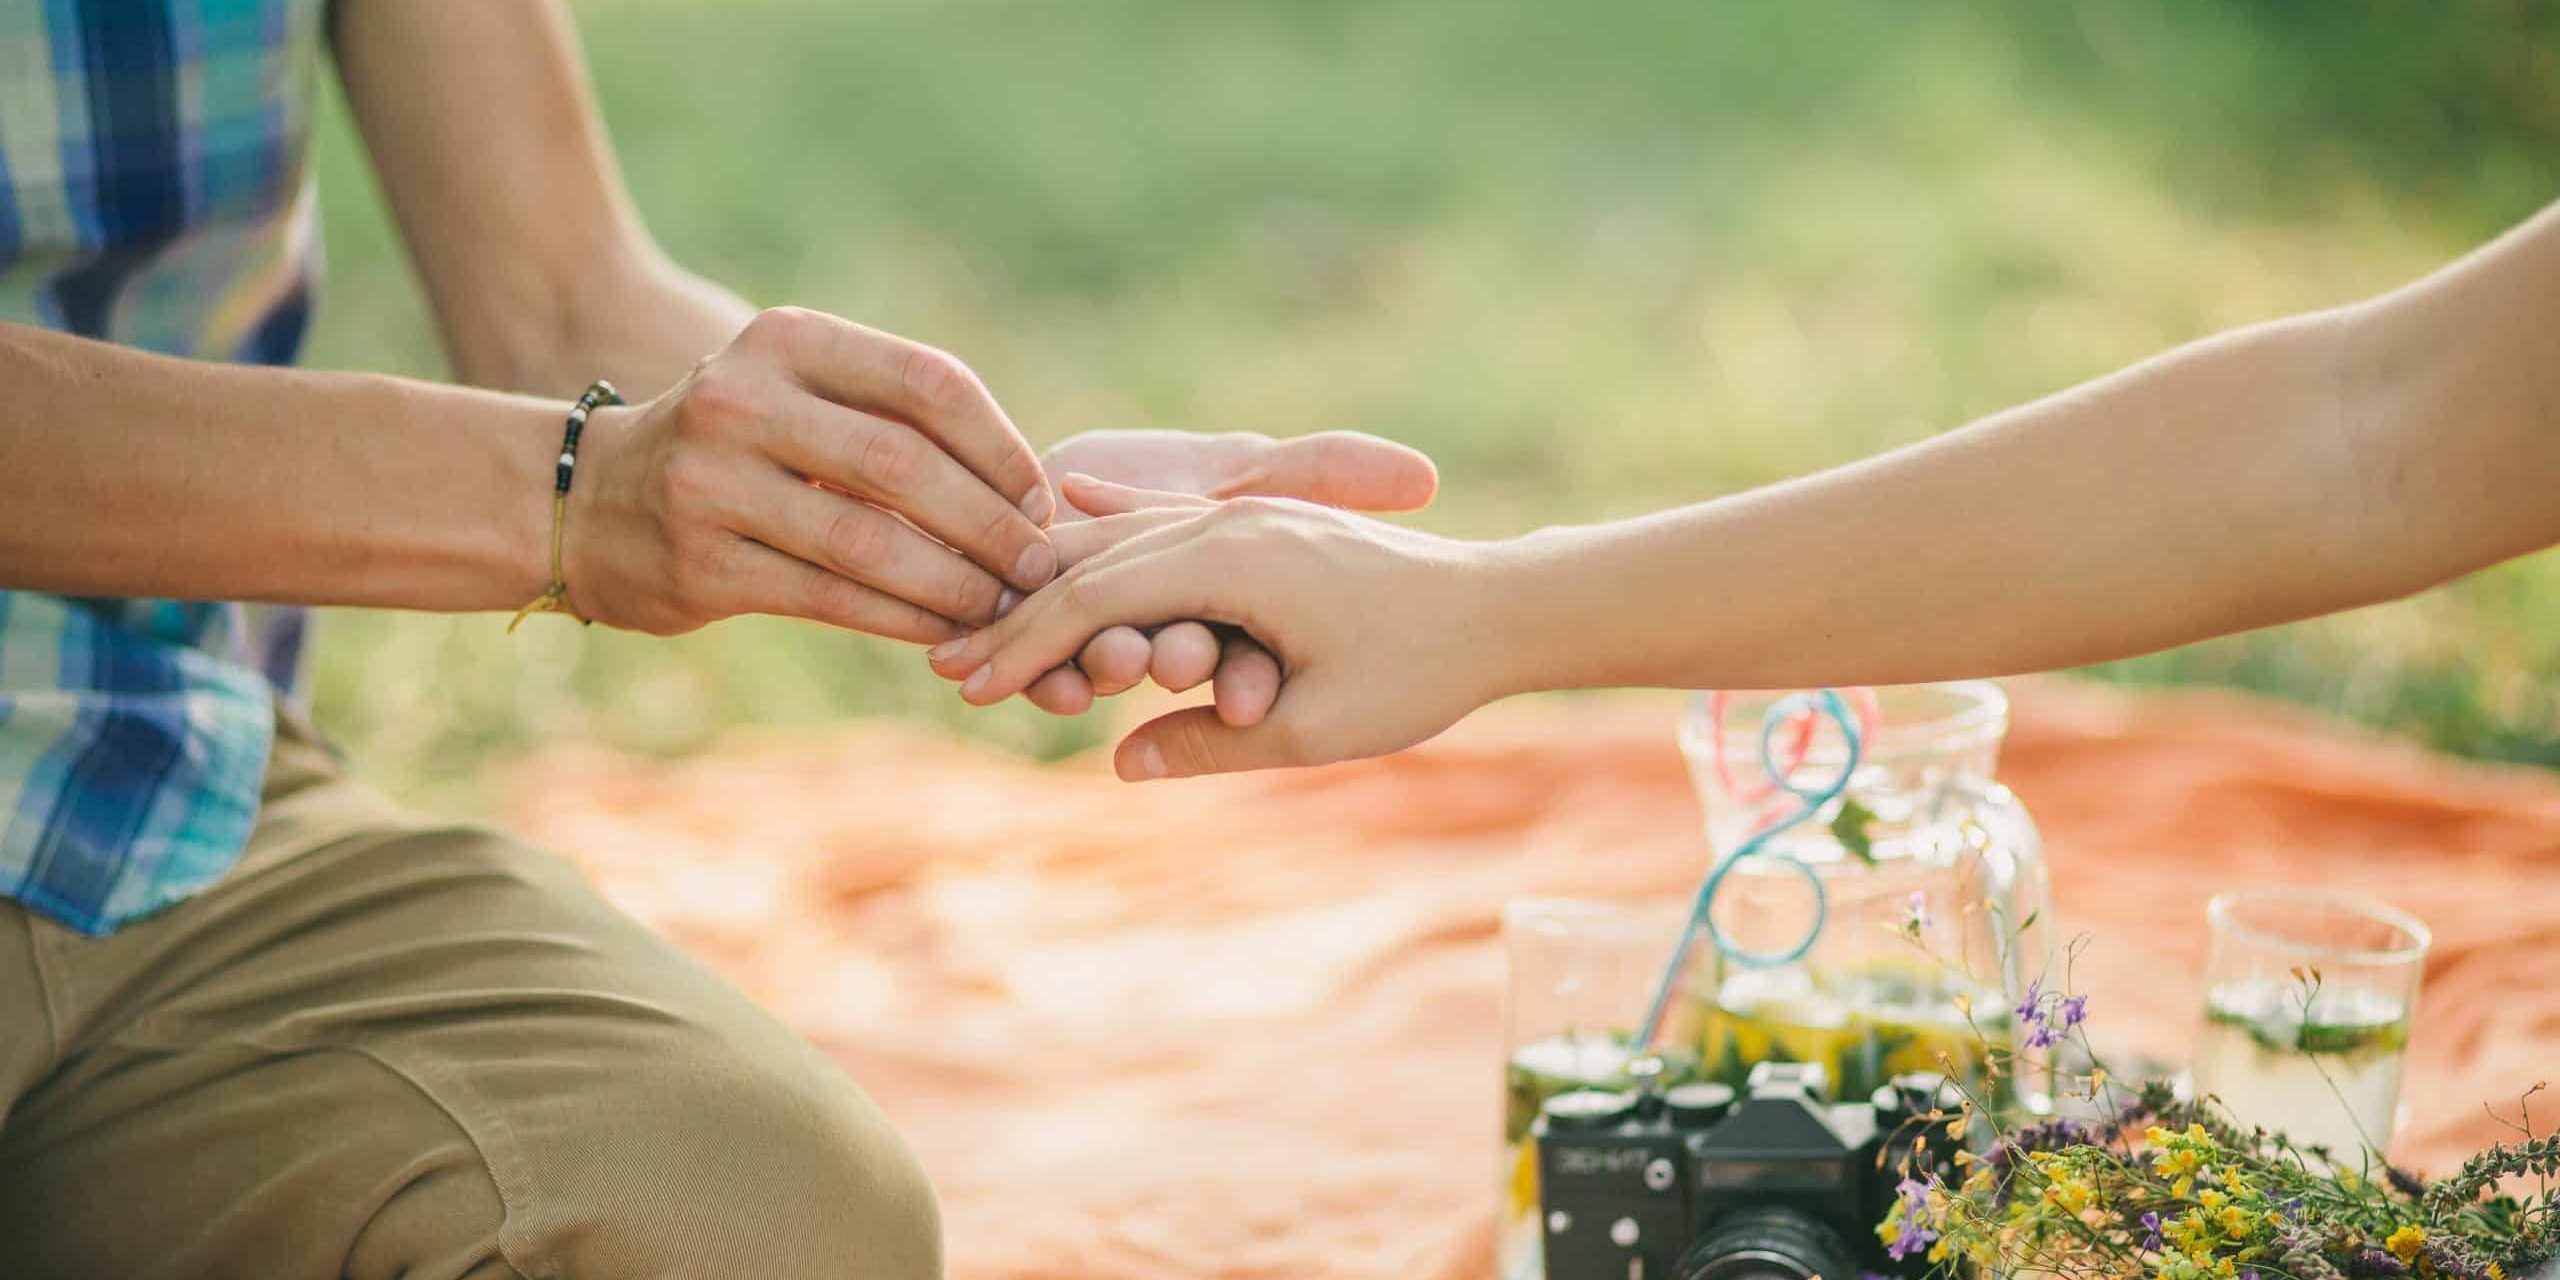 engagement ring proposal hands close up in picnic